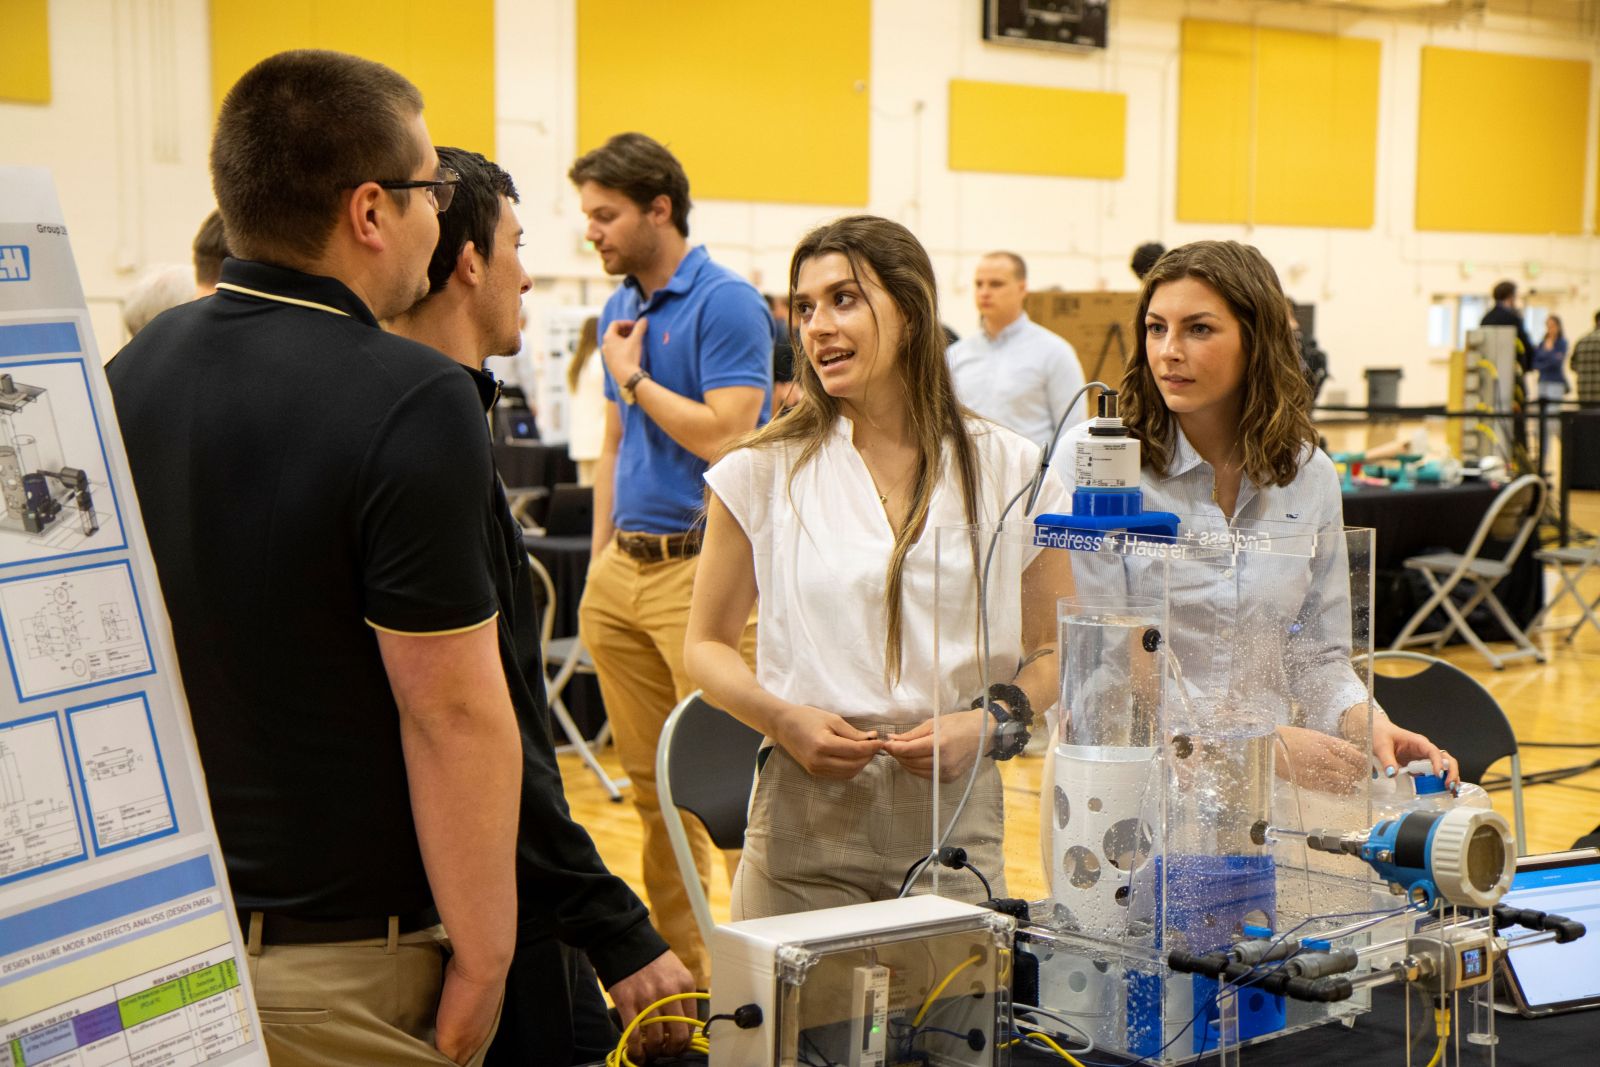 (Left to right) Andrew Nelson, Mitchel Mayer, Max Imler, Emily Laux and Taylor Jackson from the Endress and Hauser group. (Purdue University photo/Zach Rodimel)